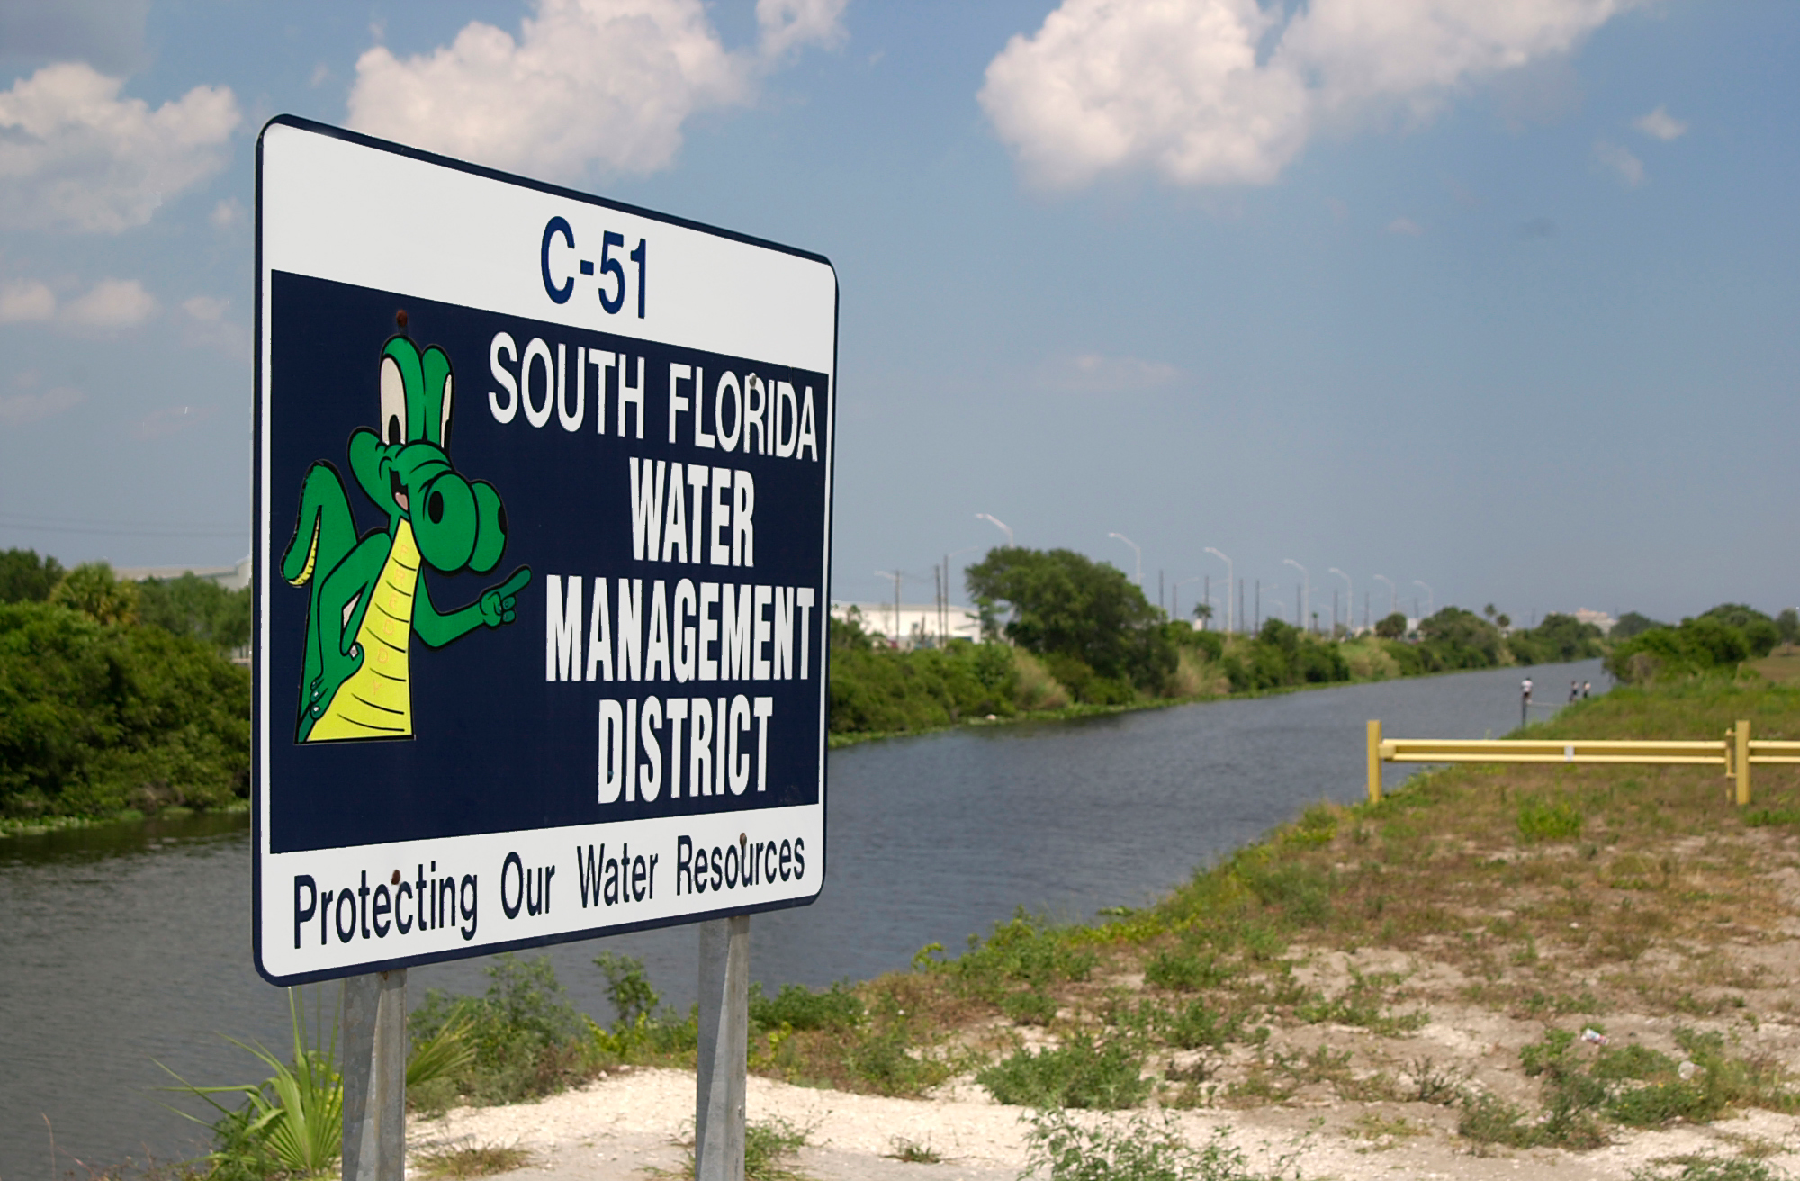 Government image of South Florida Water Authority signage